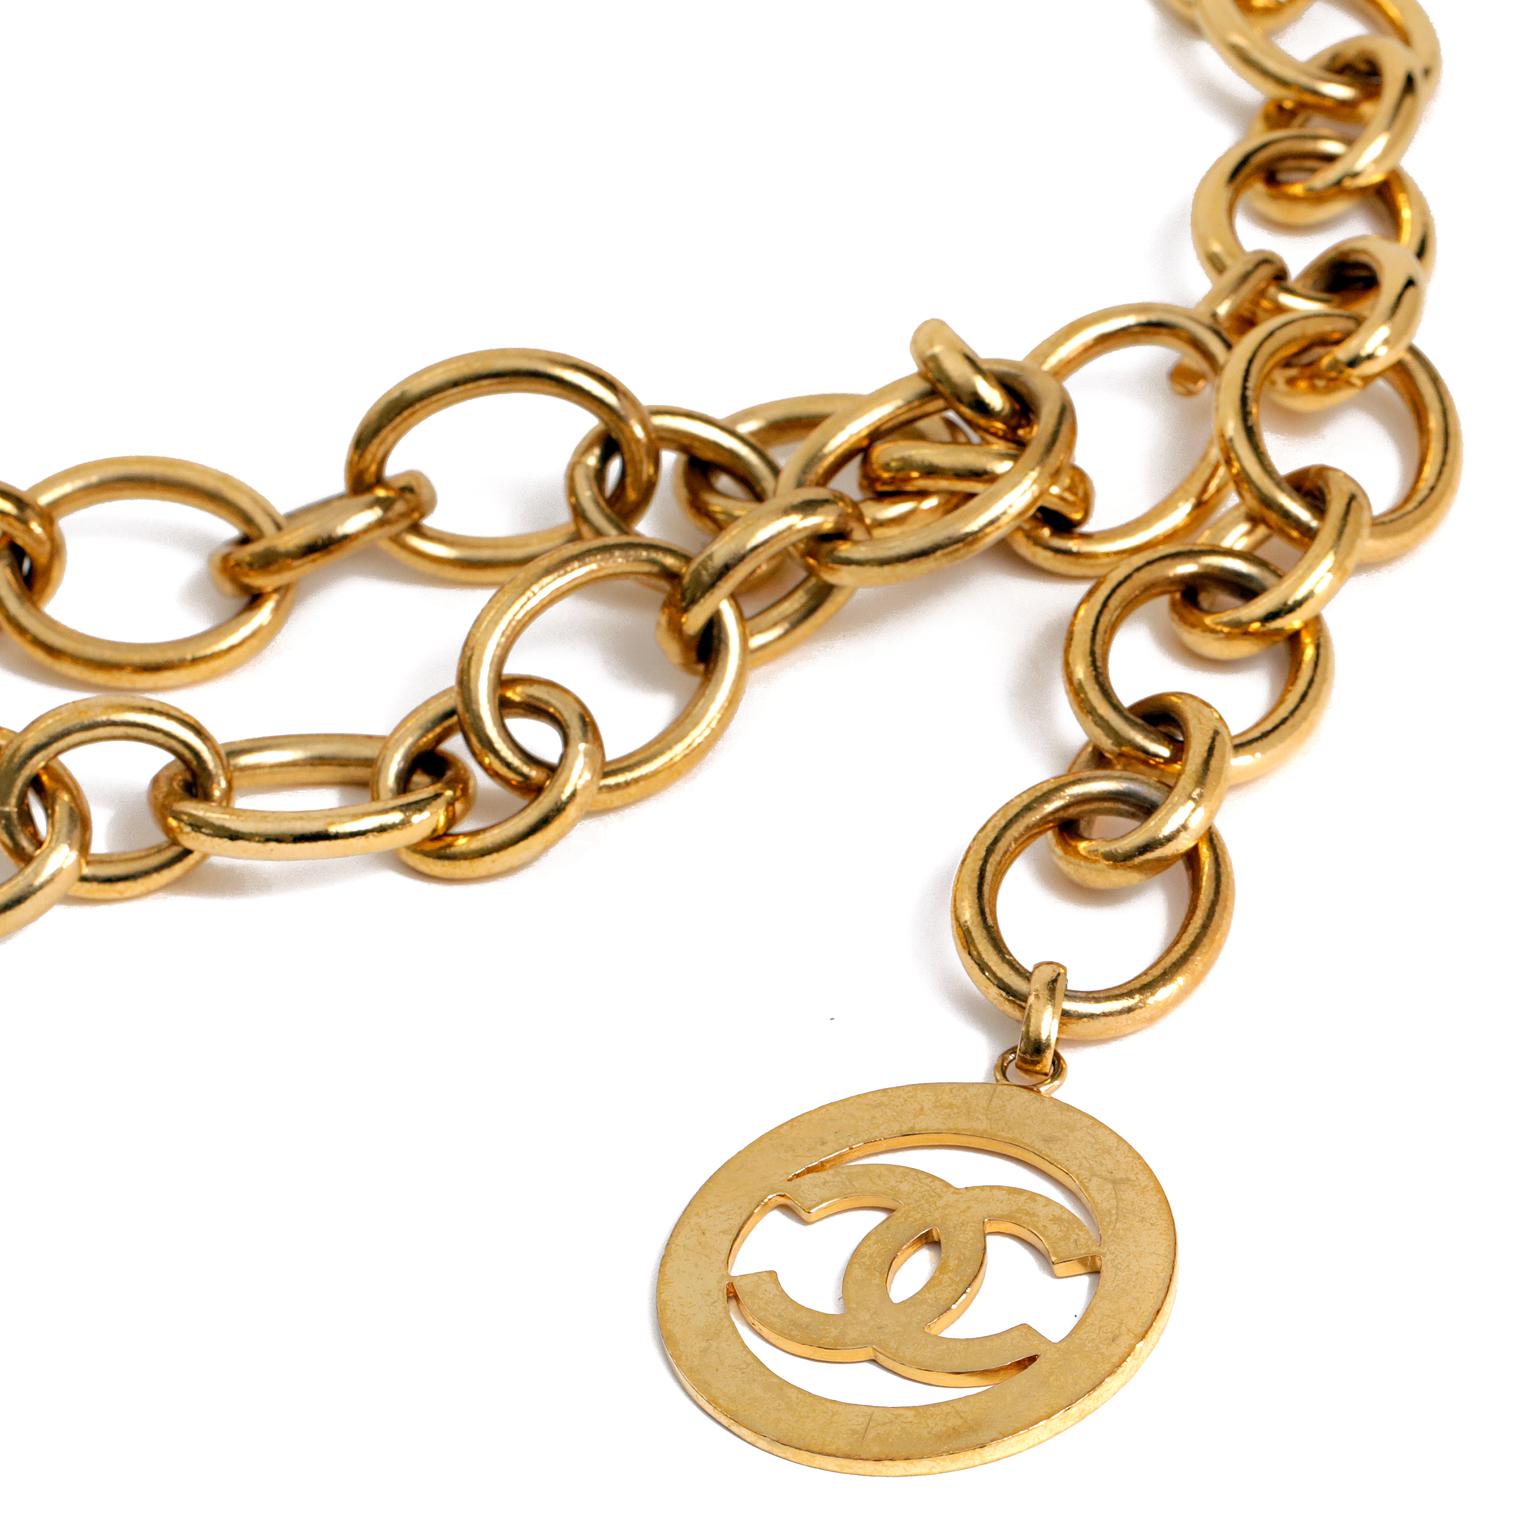  Chanel Gold Chain Belt -excellent condition  
Large gold linked double belt with adjustable length.  A large flat gold disc with interlocking CC dangles from the end.
